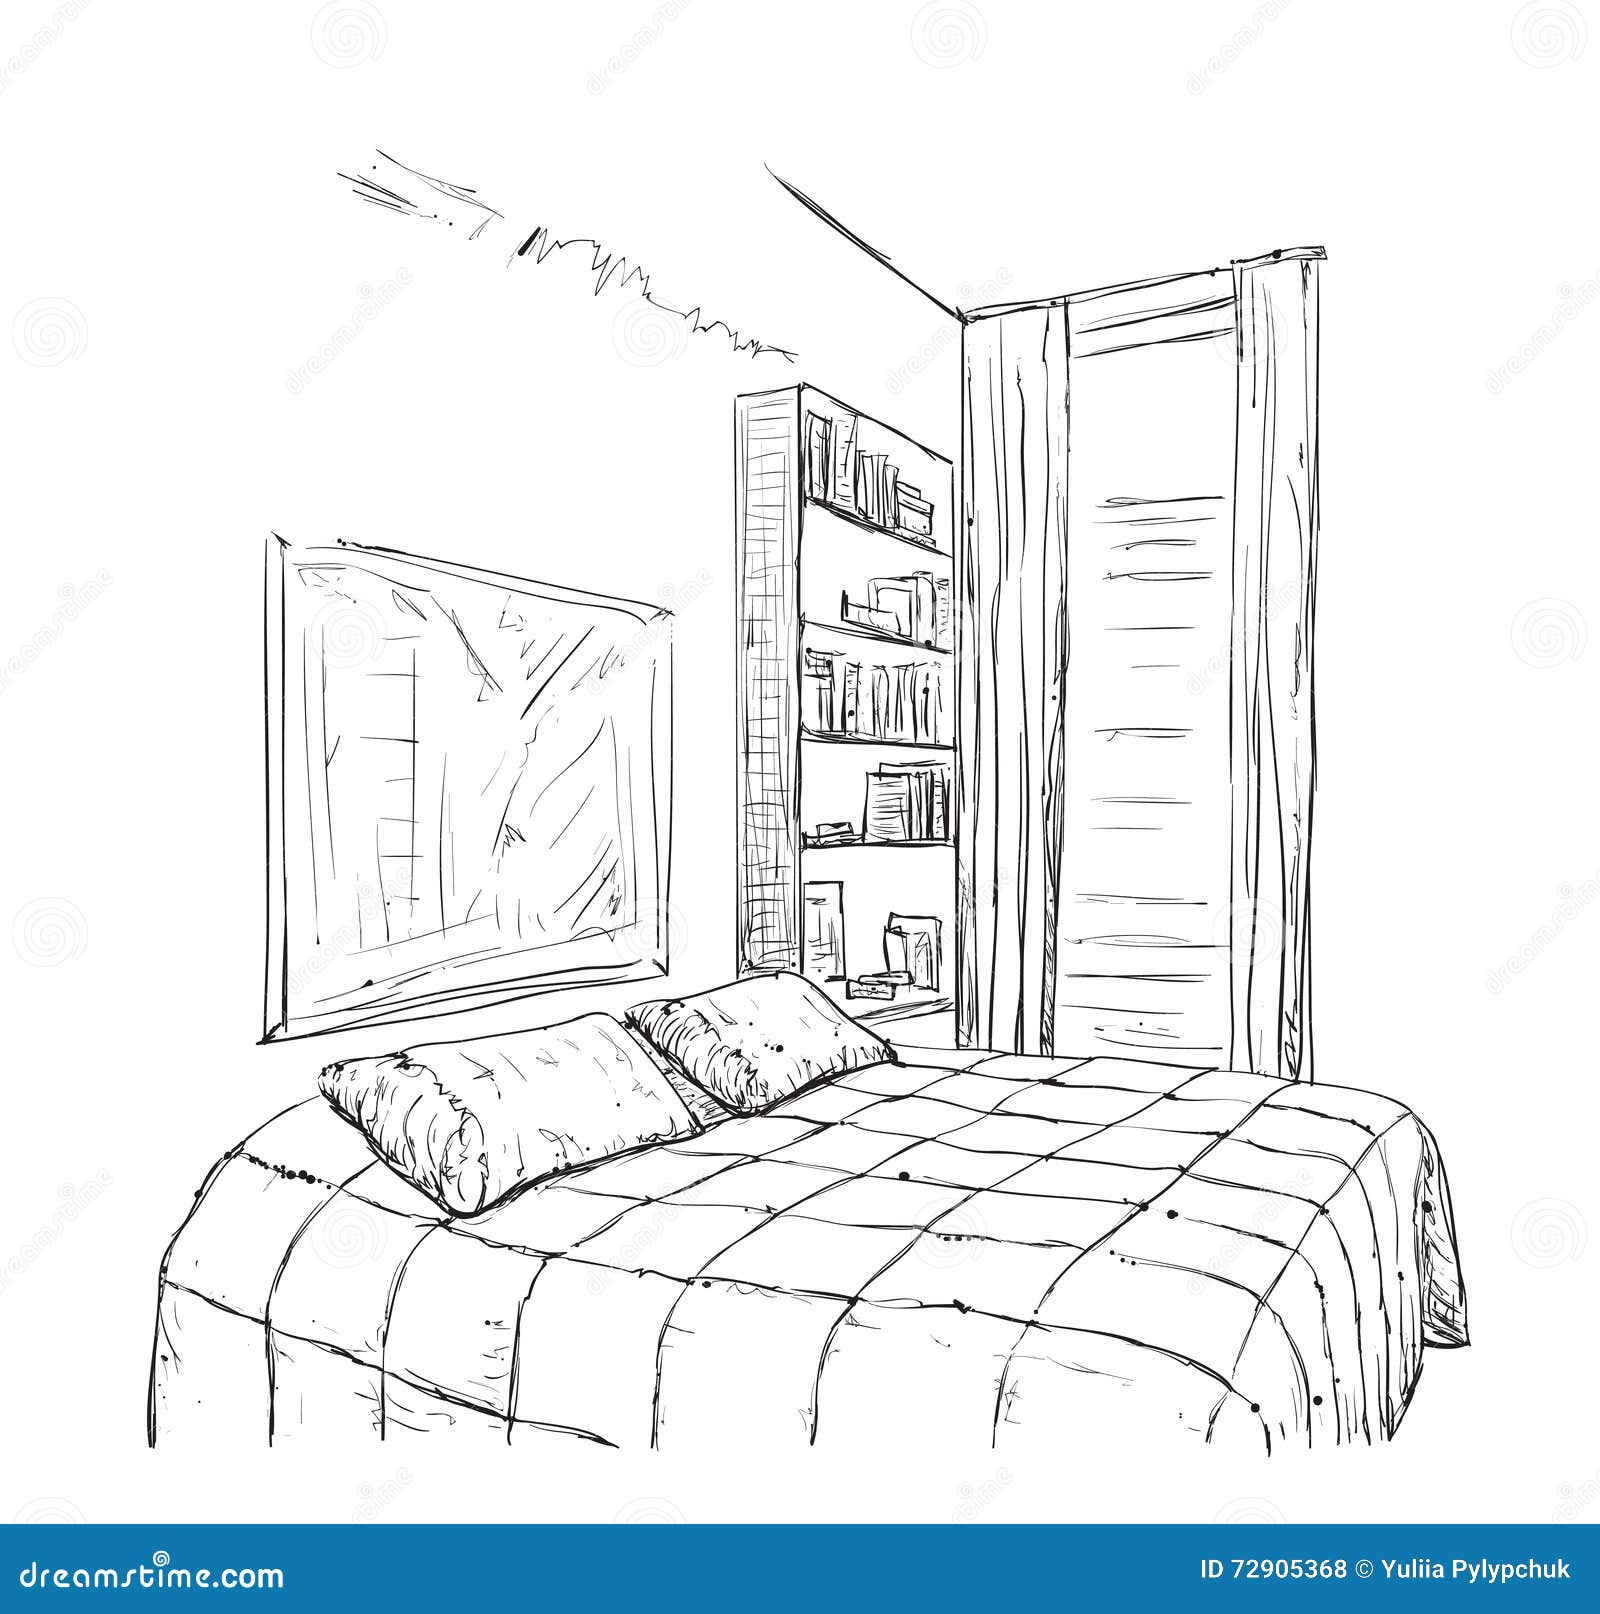 Bedroom Interior Sketch Hand Drawn Furniture HighRes Vector Graphic   Getty Images